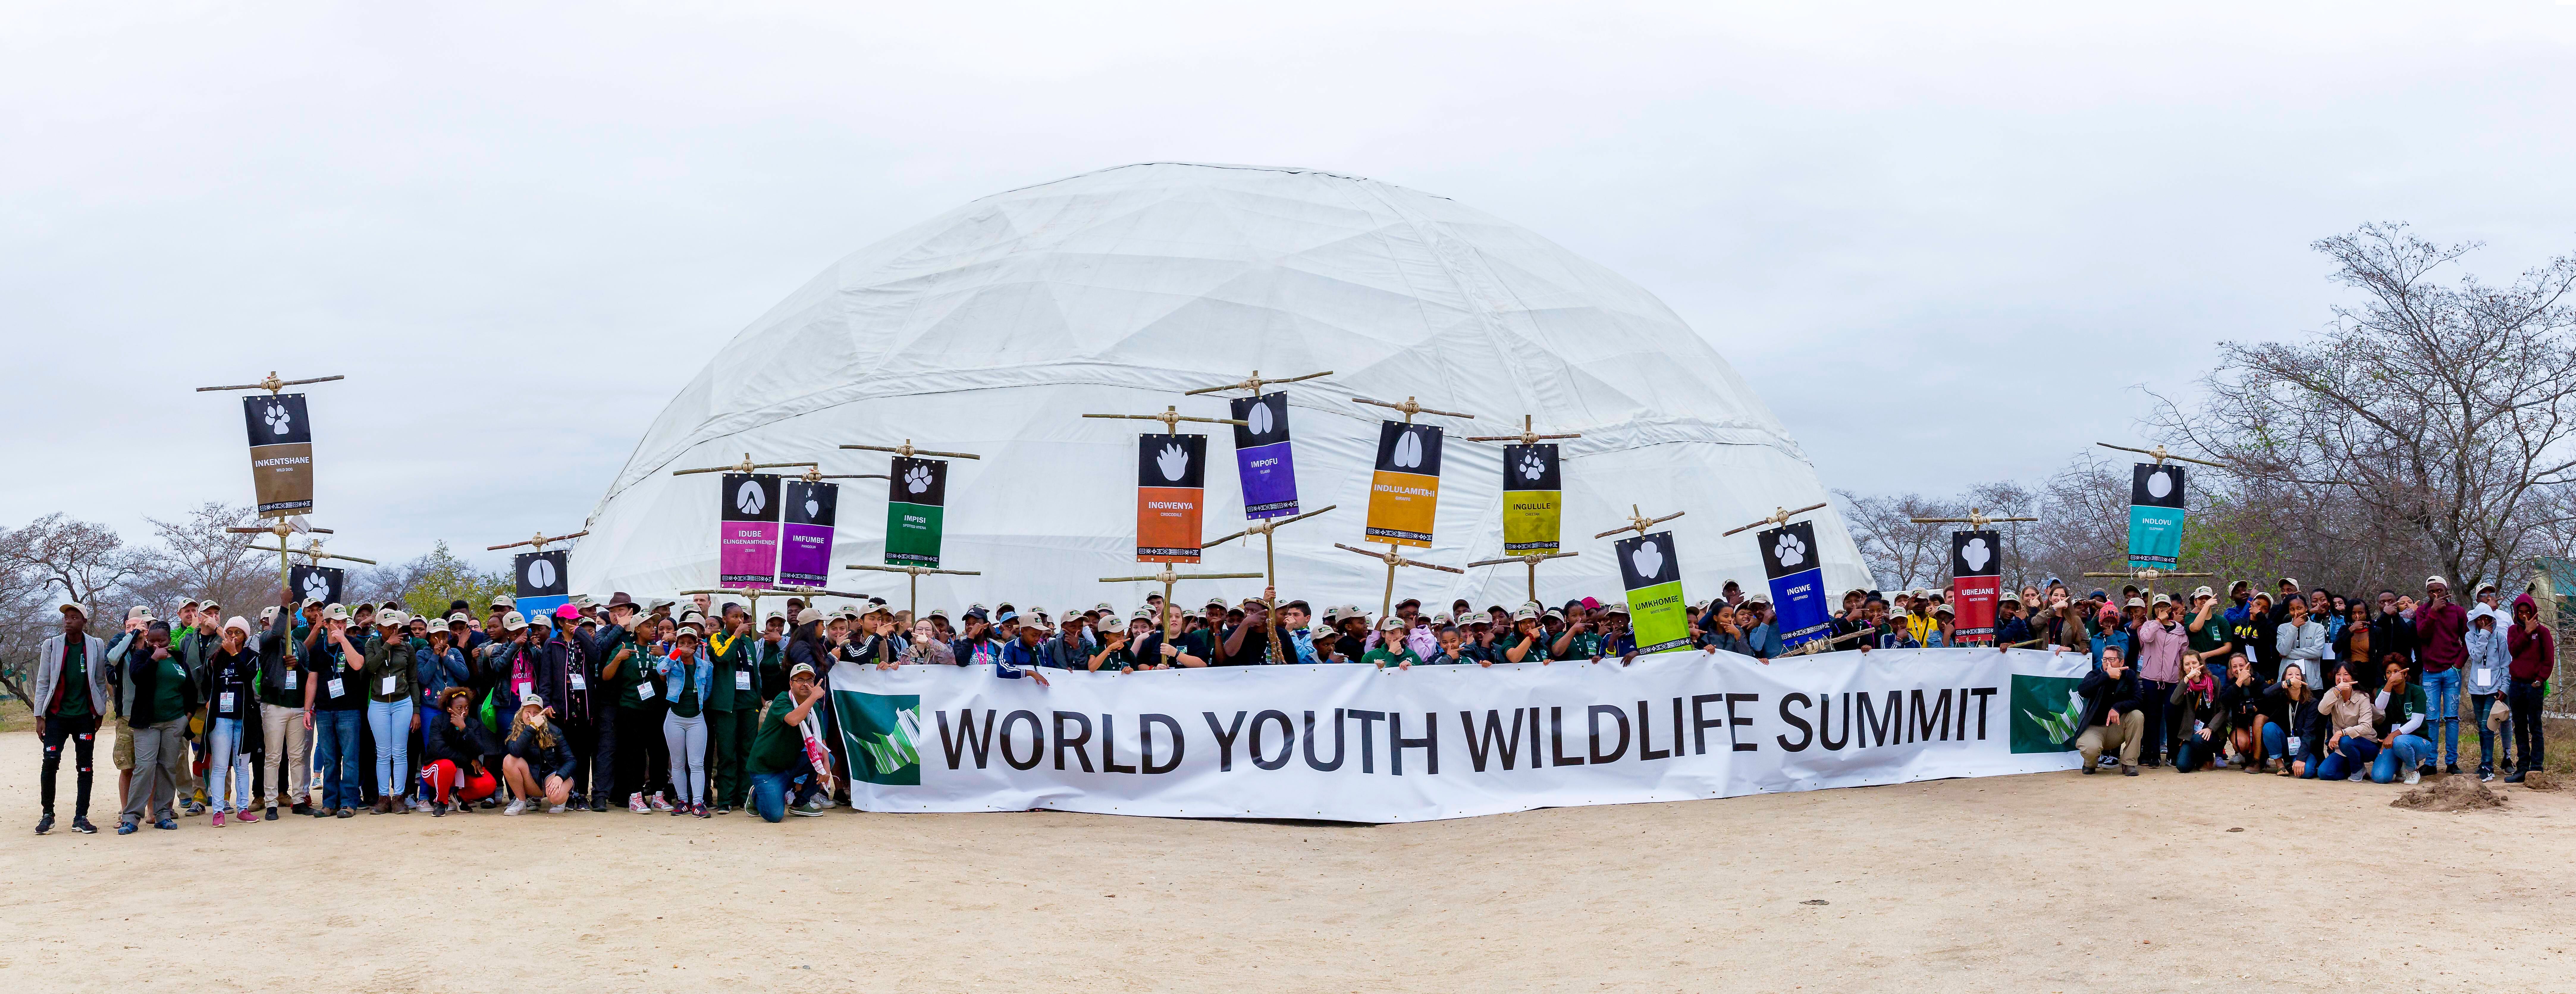 Image - Roehampton student attends World Youth Wildlife Summit as young conservation leader